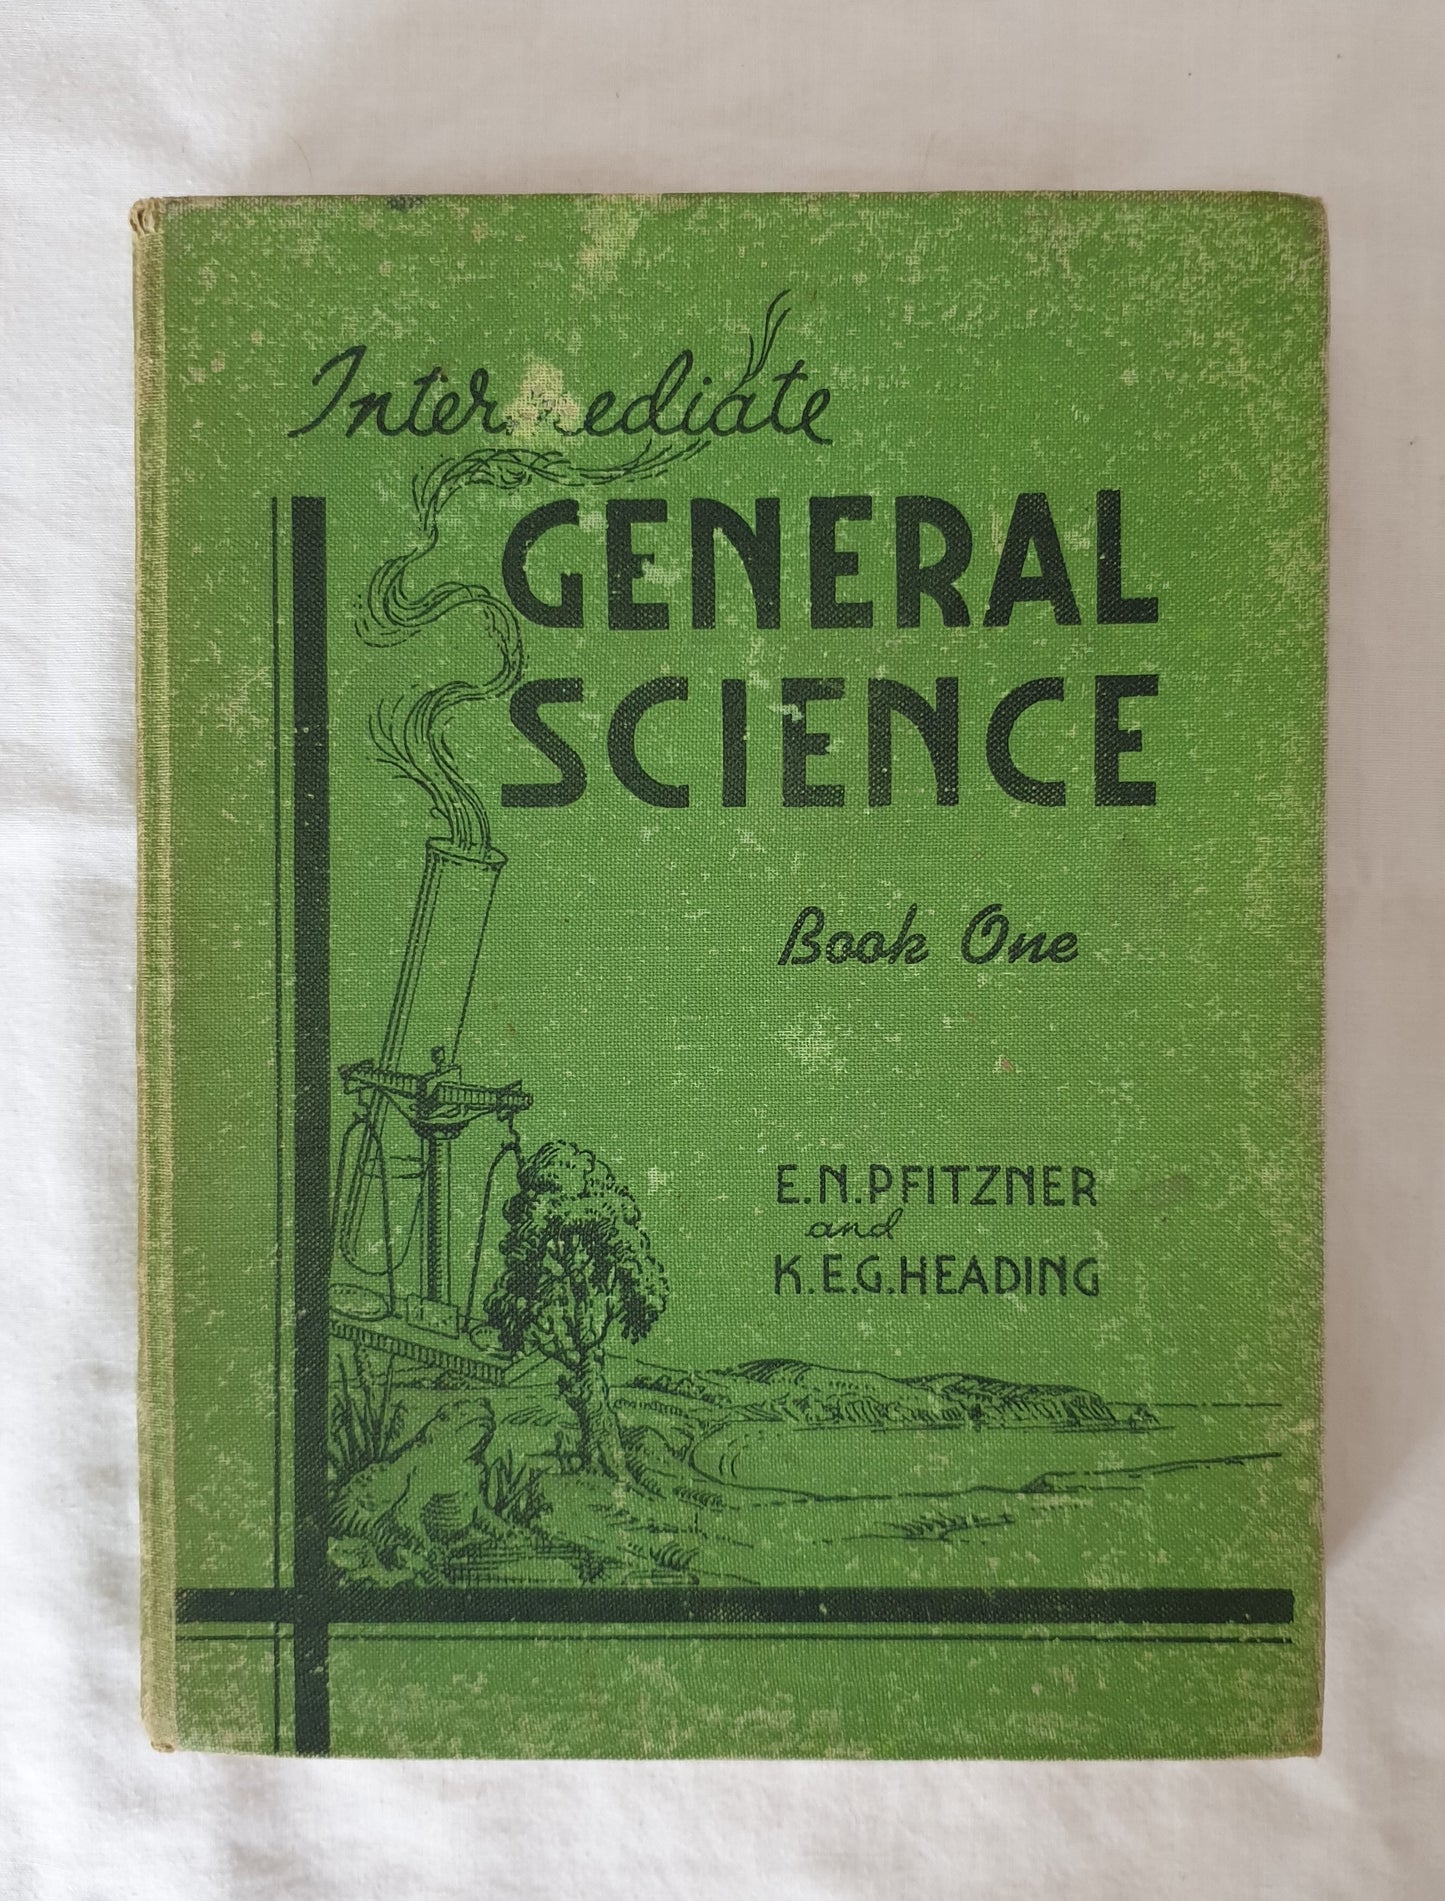 Intermediate General Science by Pfitzner and Heading